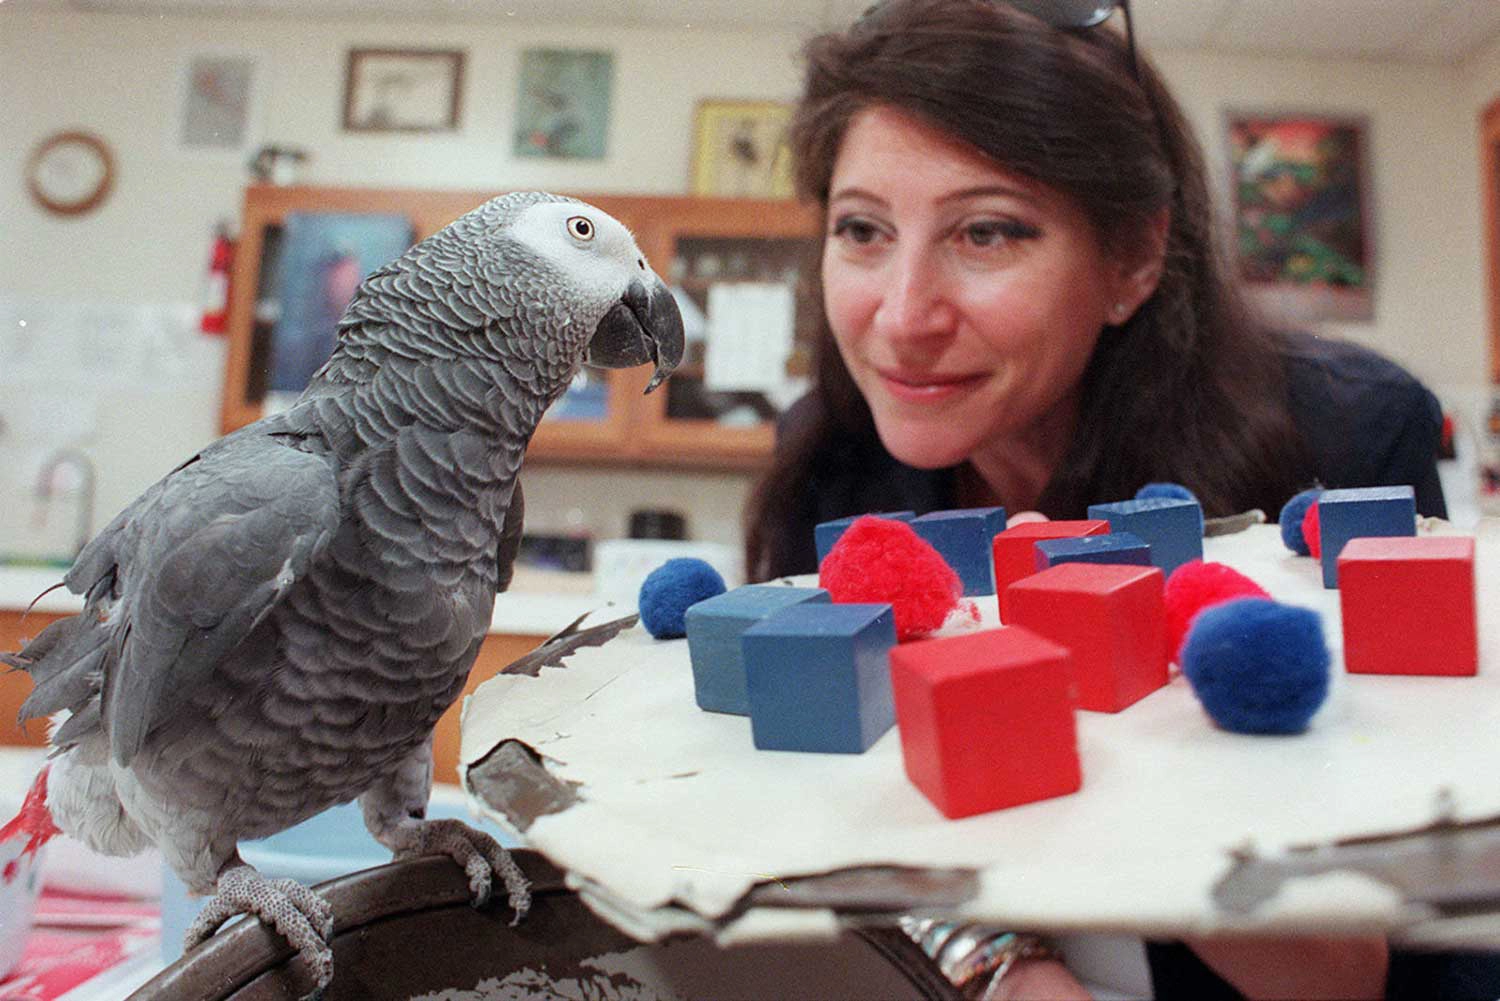 Alex the parrot sits in front of a tray of red and blue objects. Dr. Irene Pepperperg stares at him closely.